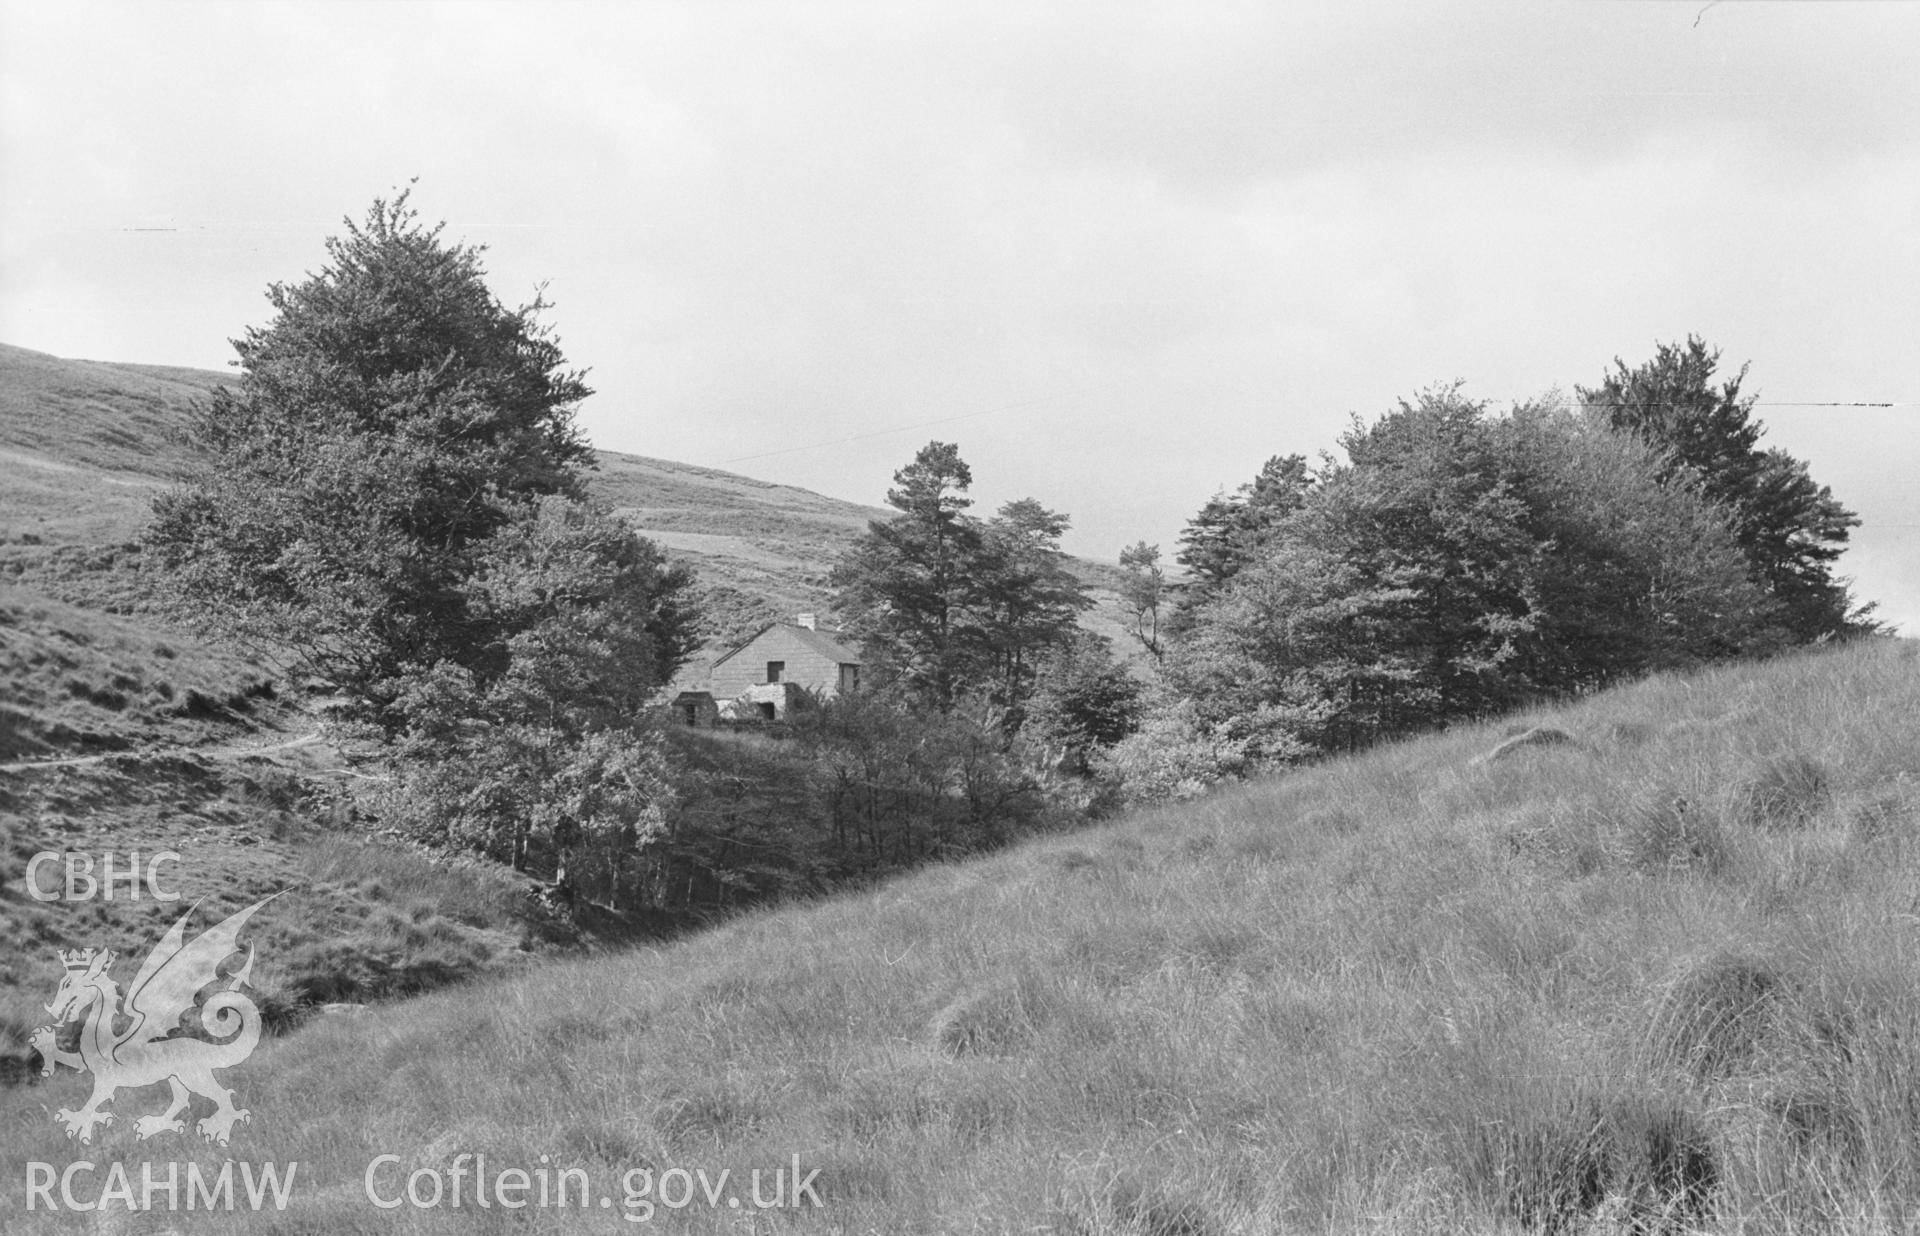 Digital copy of a black and white negative showing landscape near Capel Soar-y-Mynydd, Llanddewi Brefi. Photographed in September 1963 by Arthur O. Chater from Grid Reference SN 7857 5323, looking north west.